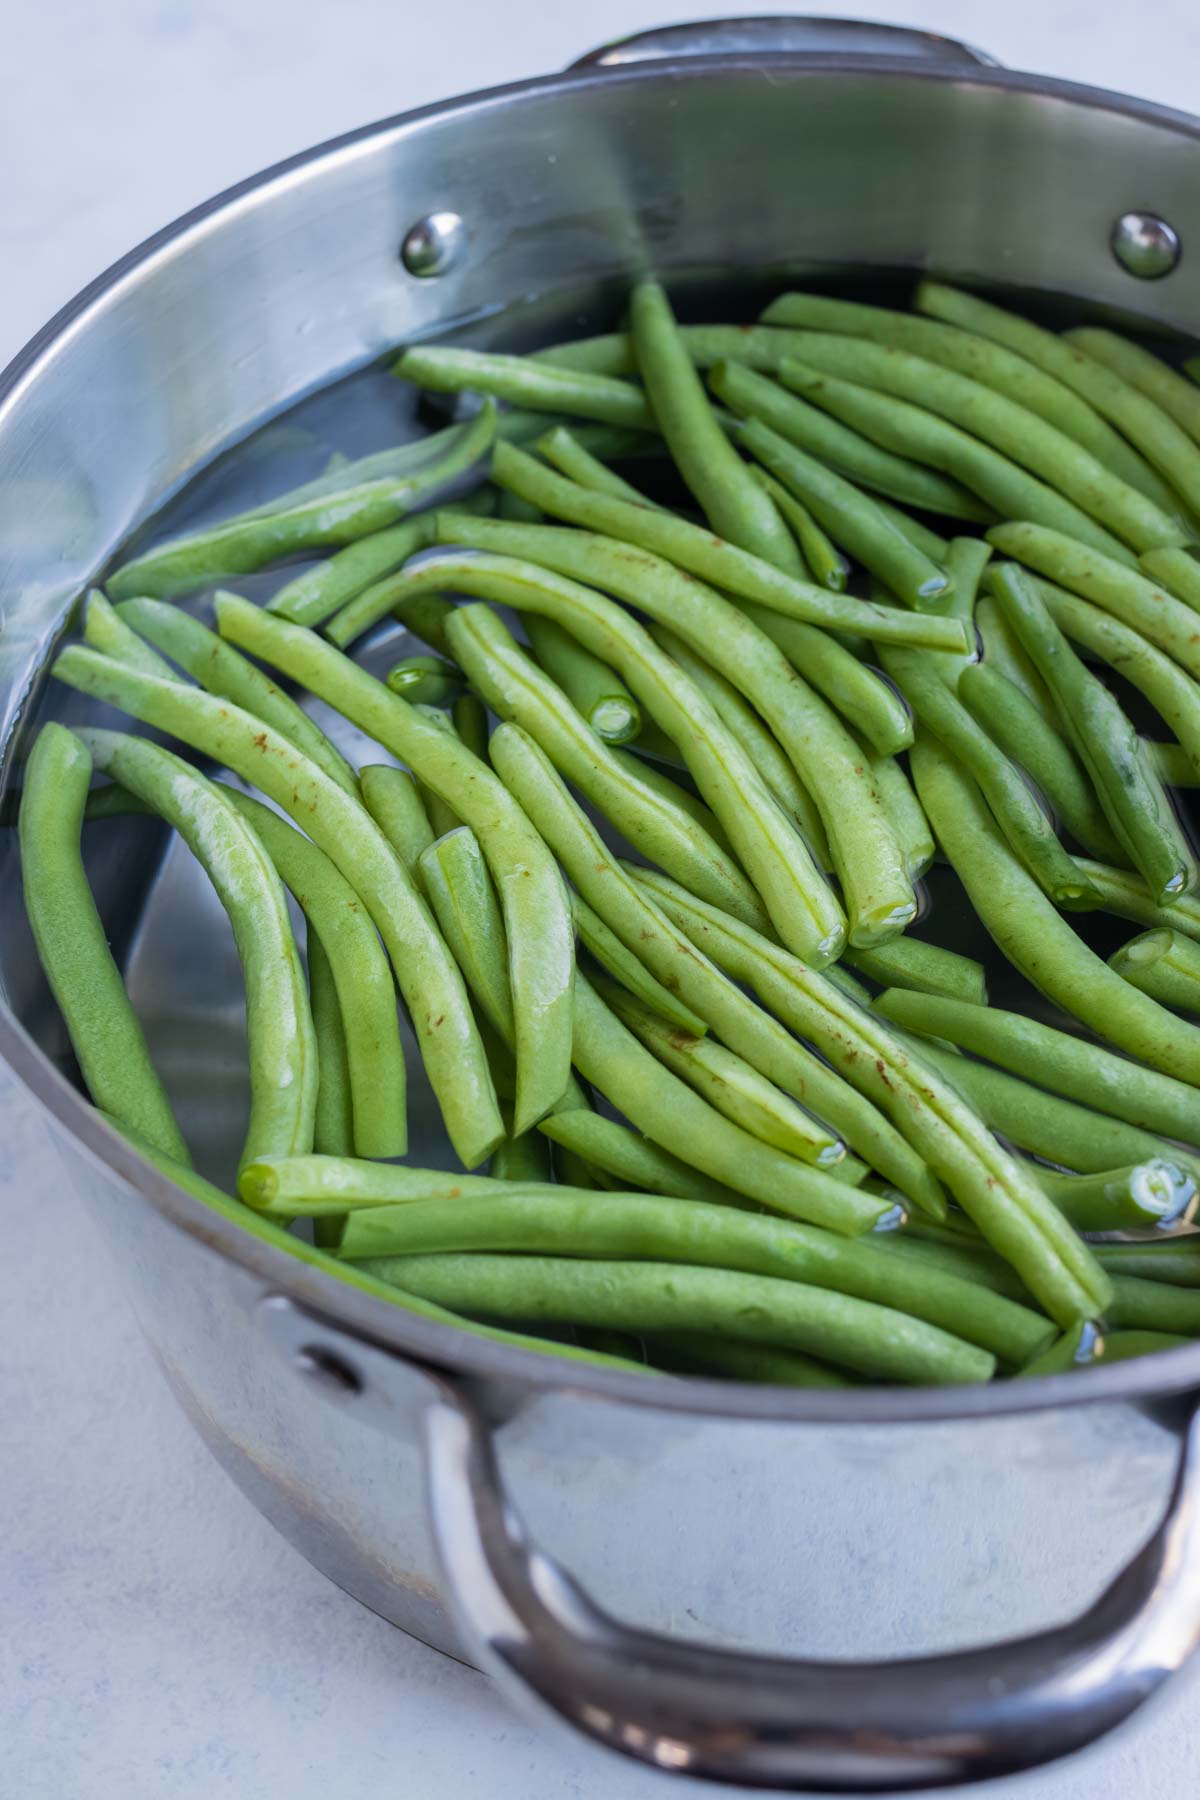 Green beans are placed into a pot of water.